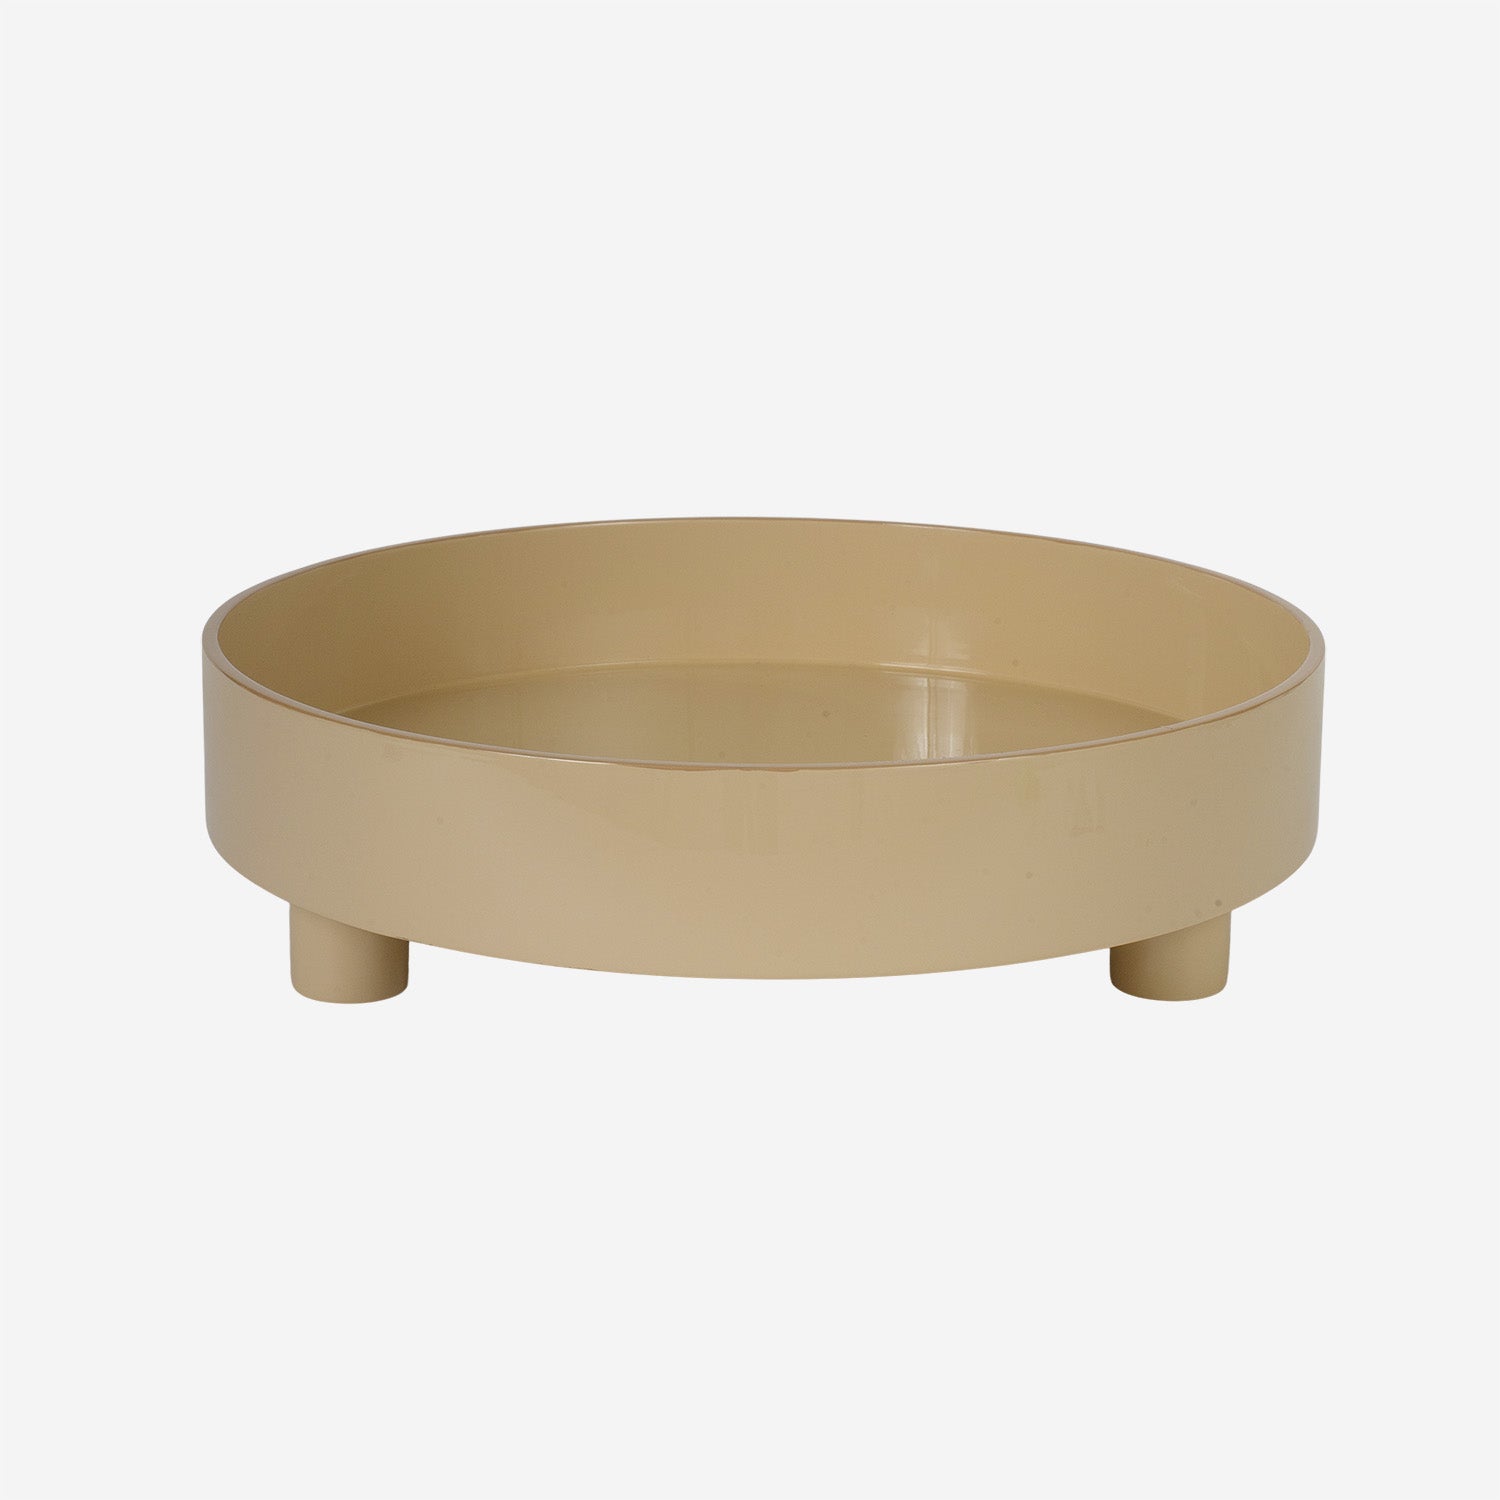 Round lacquer tray w legs Latte